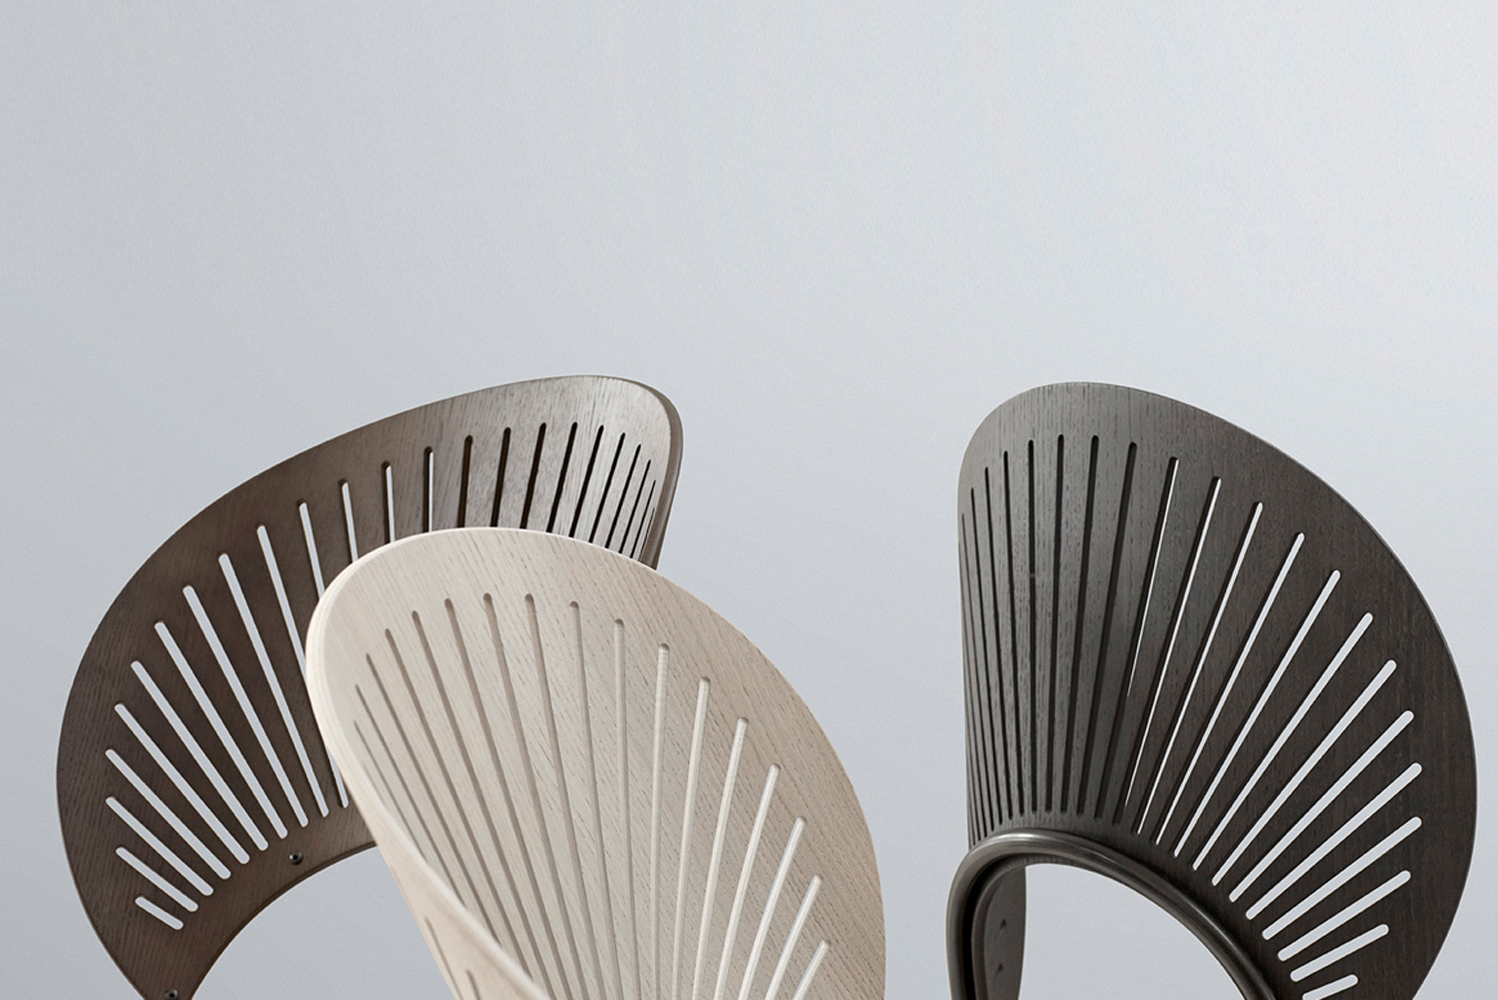 Trinidad chair which was designed by Nanna Ditzel celebrates its 25th anniversary